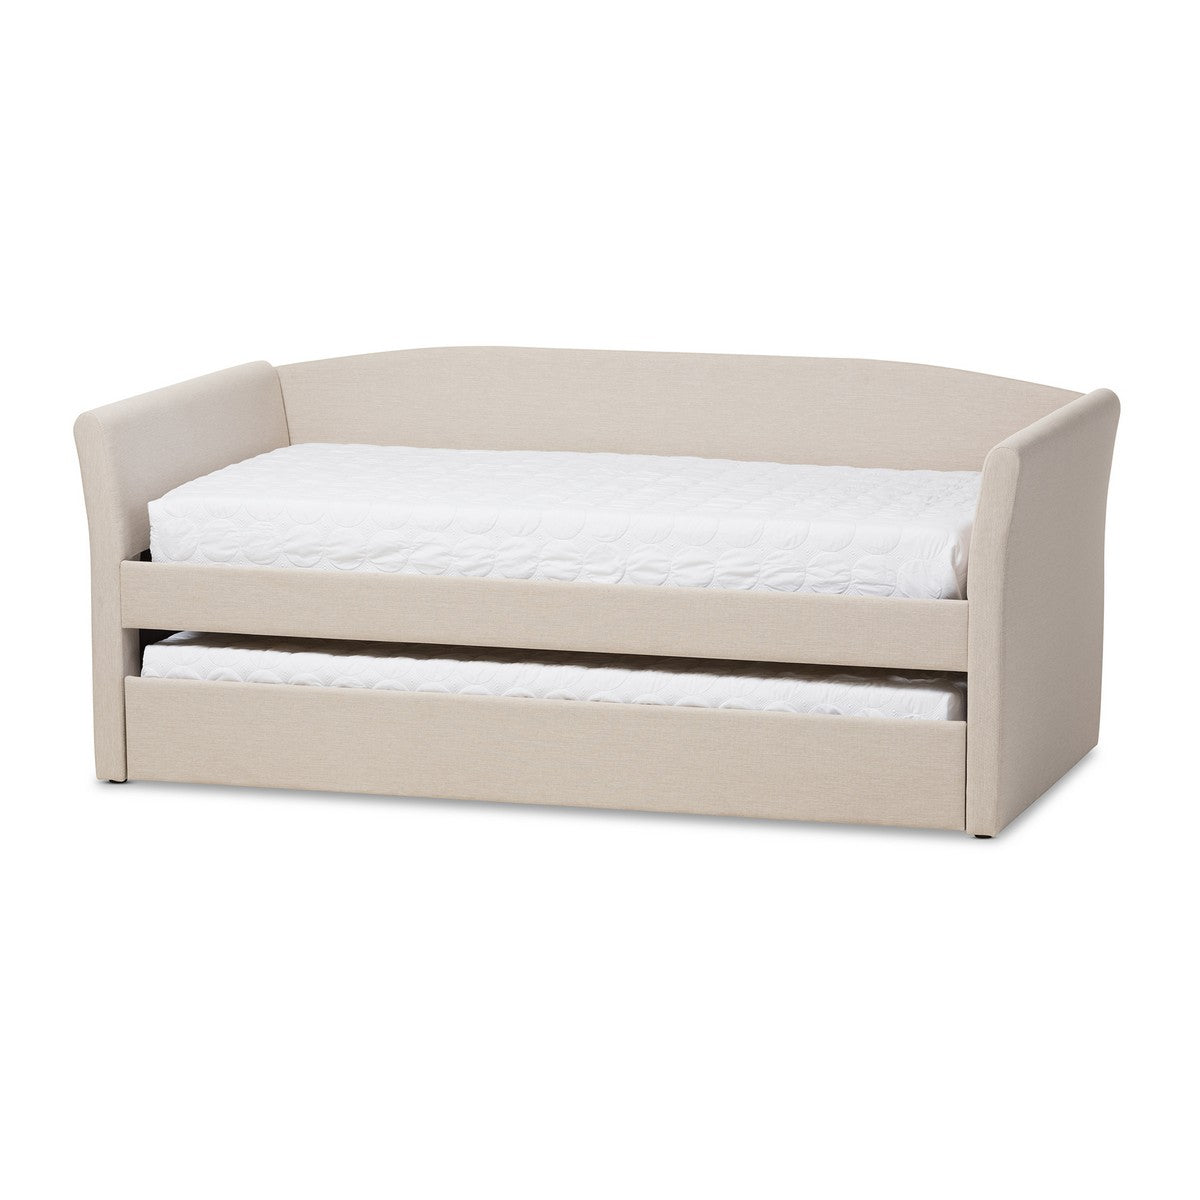 Baxton Studio Camino Modern and Contemporary Beige Fabric Upholstered Daybed with Guest Trundle Bed Baxton Studio-daybed-Minimal And Modern - 1